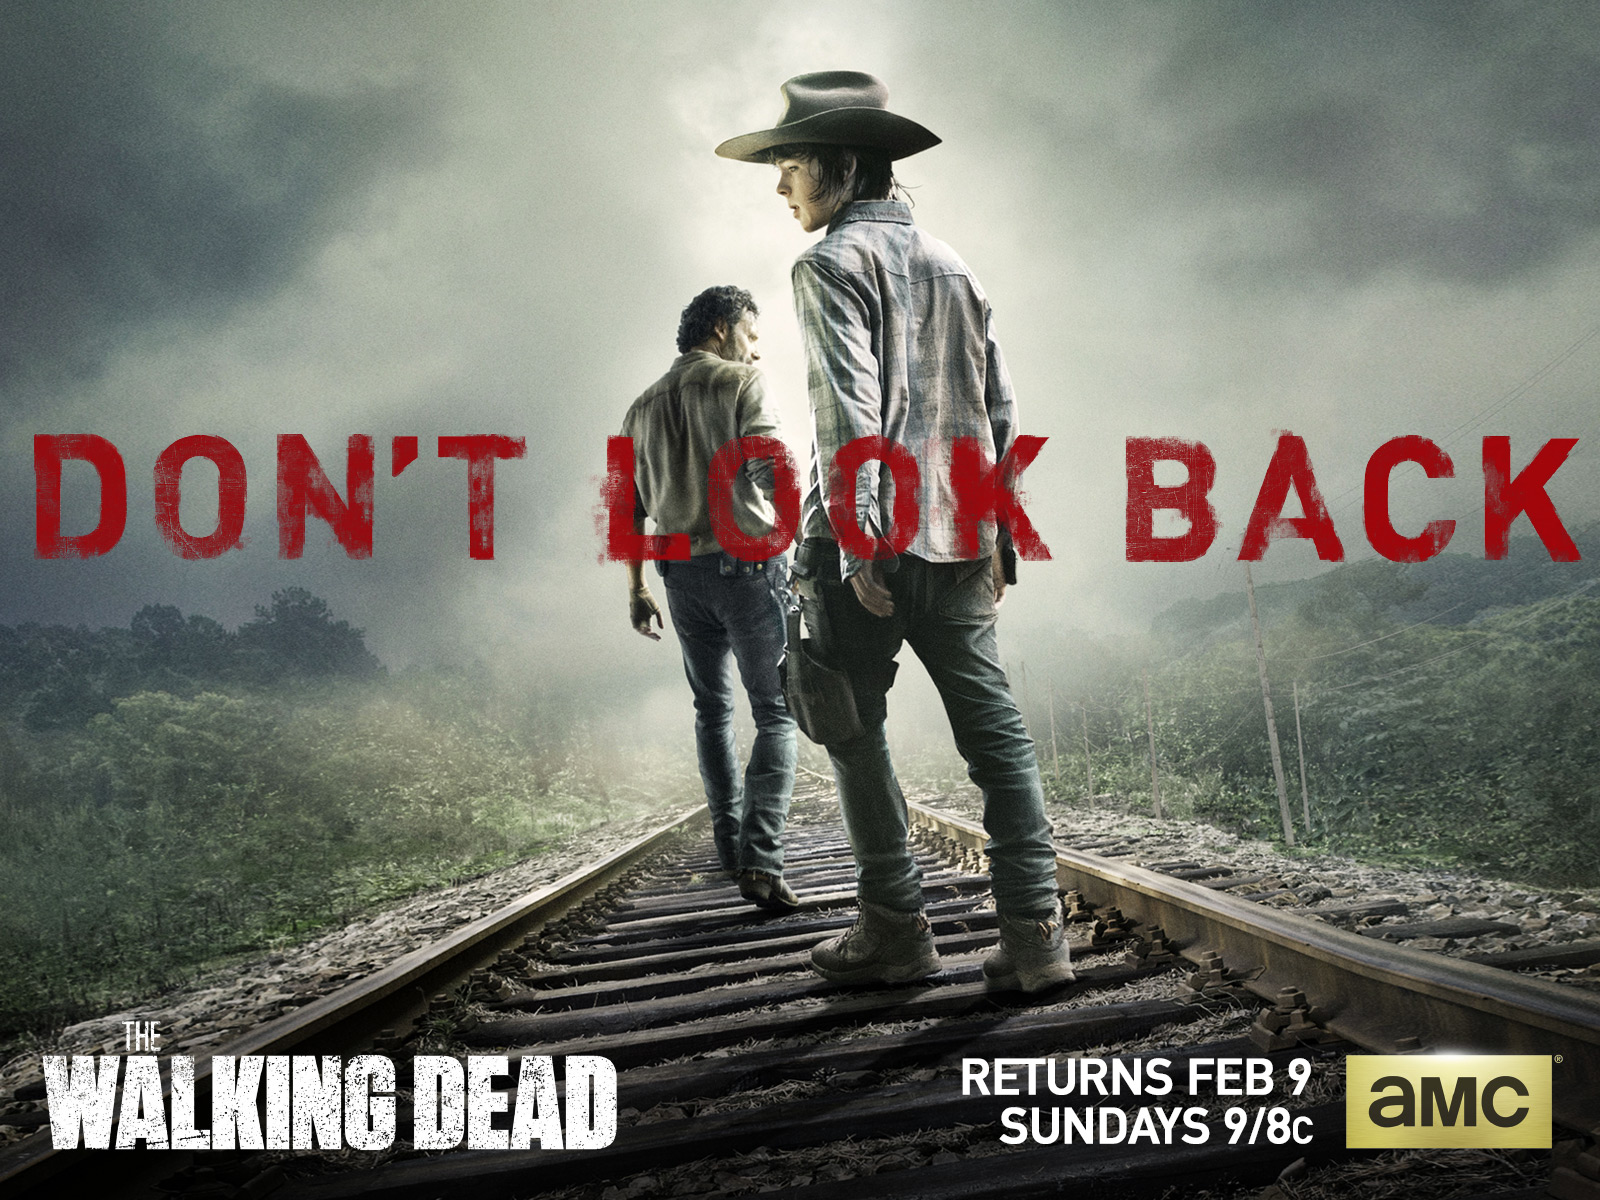 The Walking Dead Wallpaper With Carl And Rick Grimes - Poster The Walking Dead - HD Wallpaper 